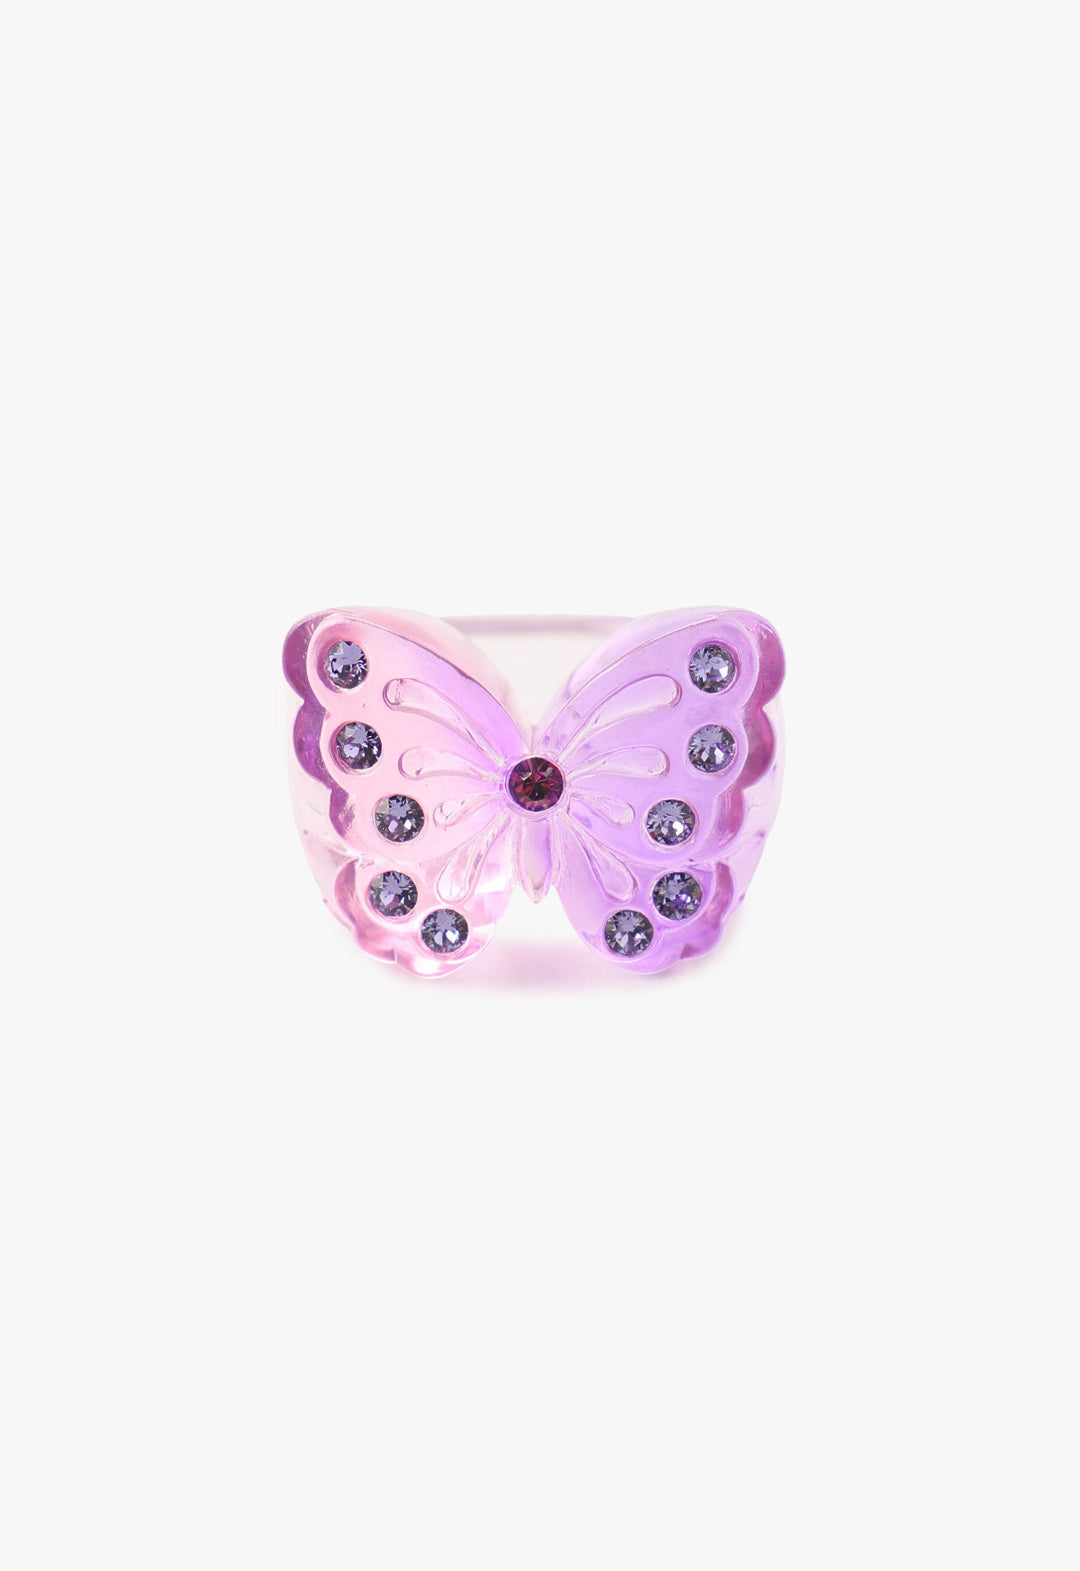 Butterfly Ring Pink 5-gemstones diamond like on each wing and red as a head